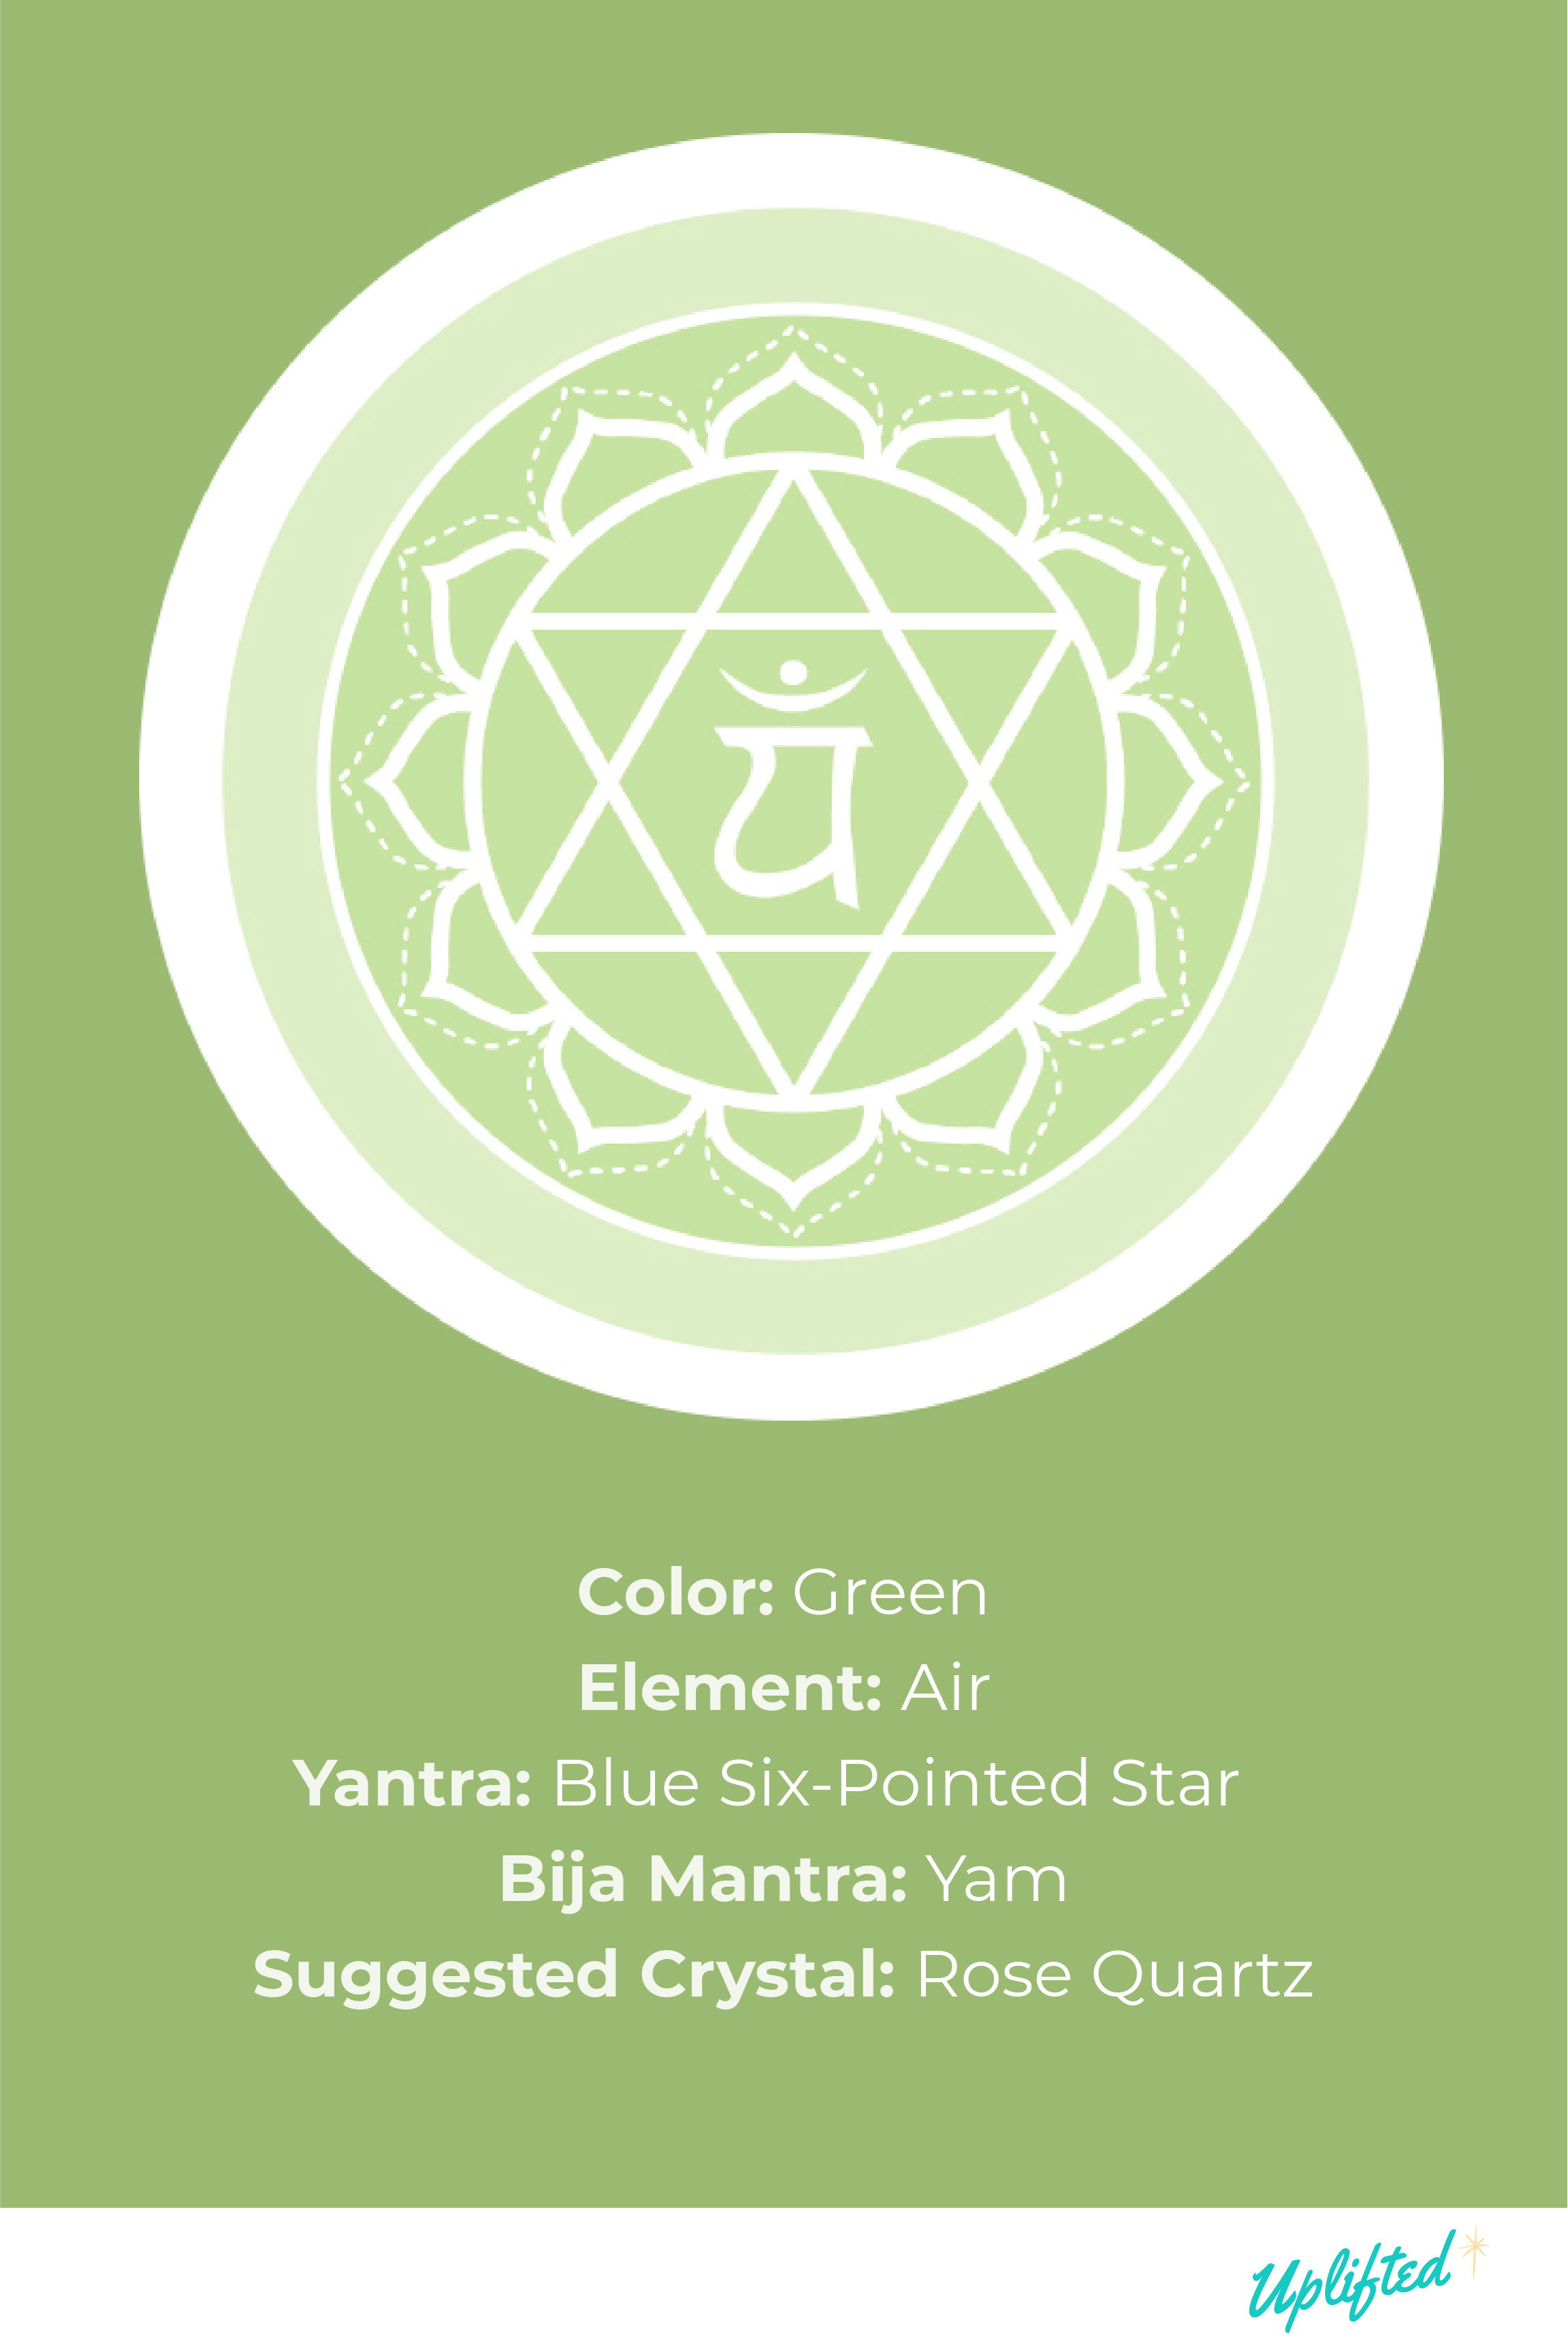 An illustration of Anahata Heart Chakra with descriptions